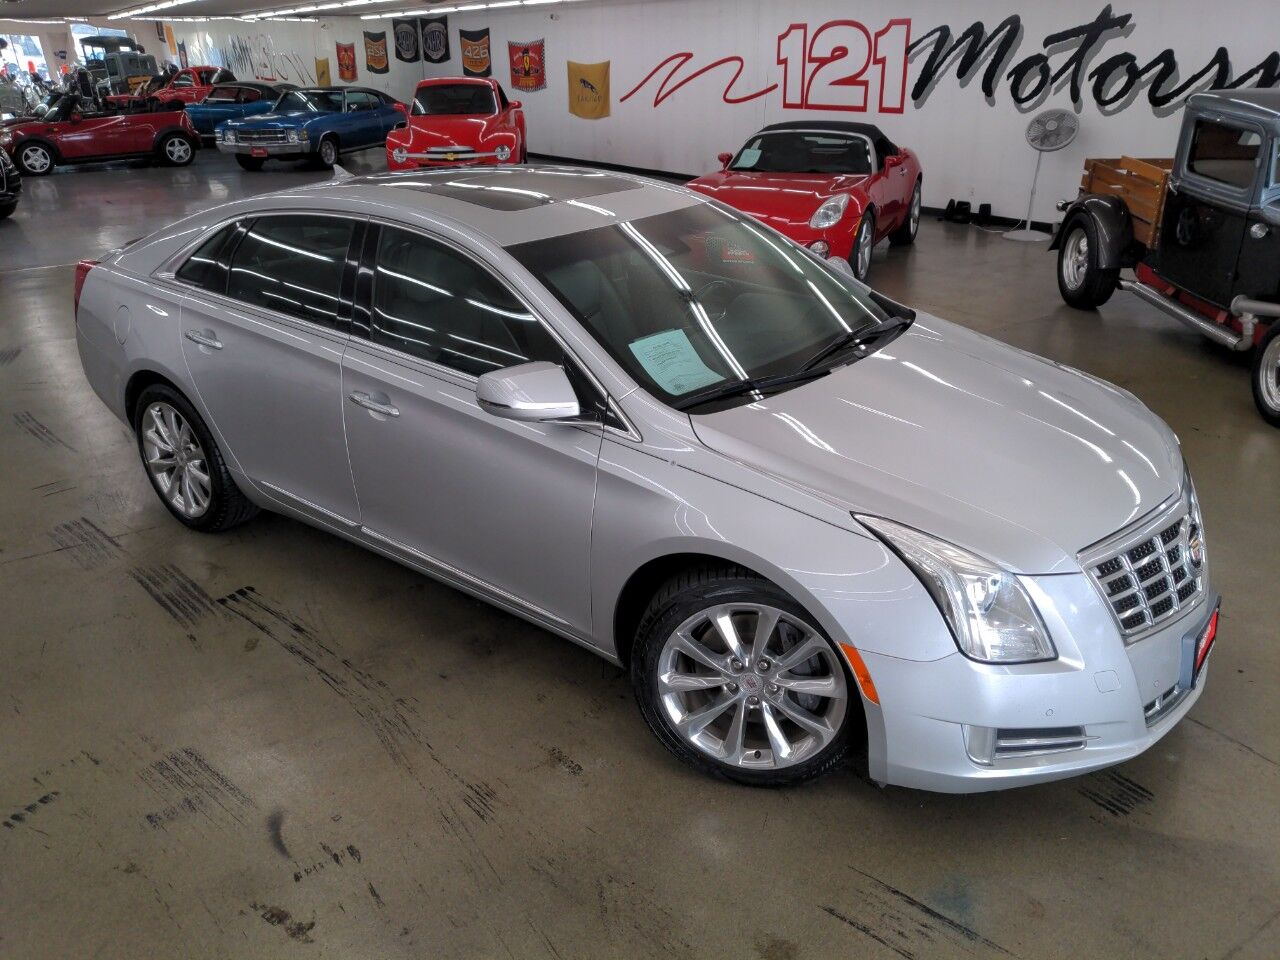 The 2013 Cadillac XTS Luxury Collection photos